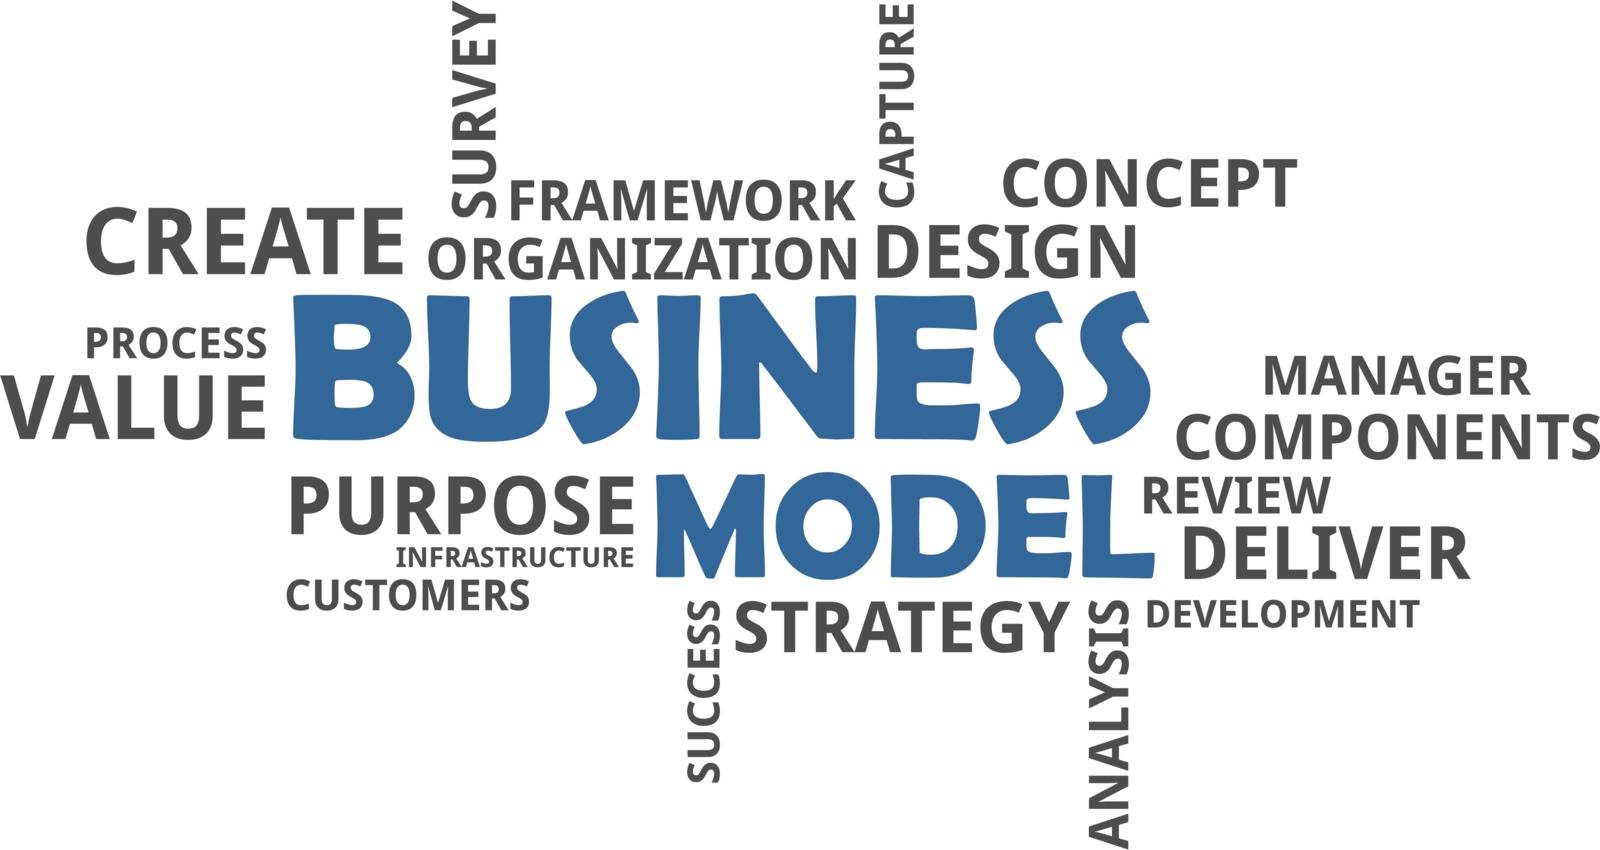 word cloud - business model by master_art